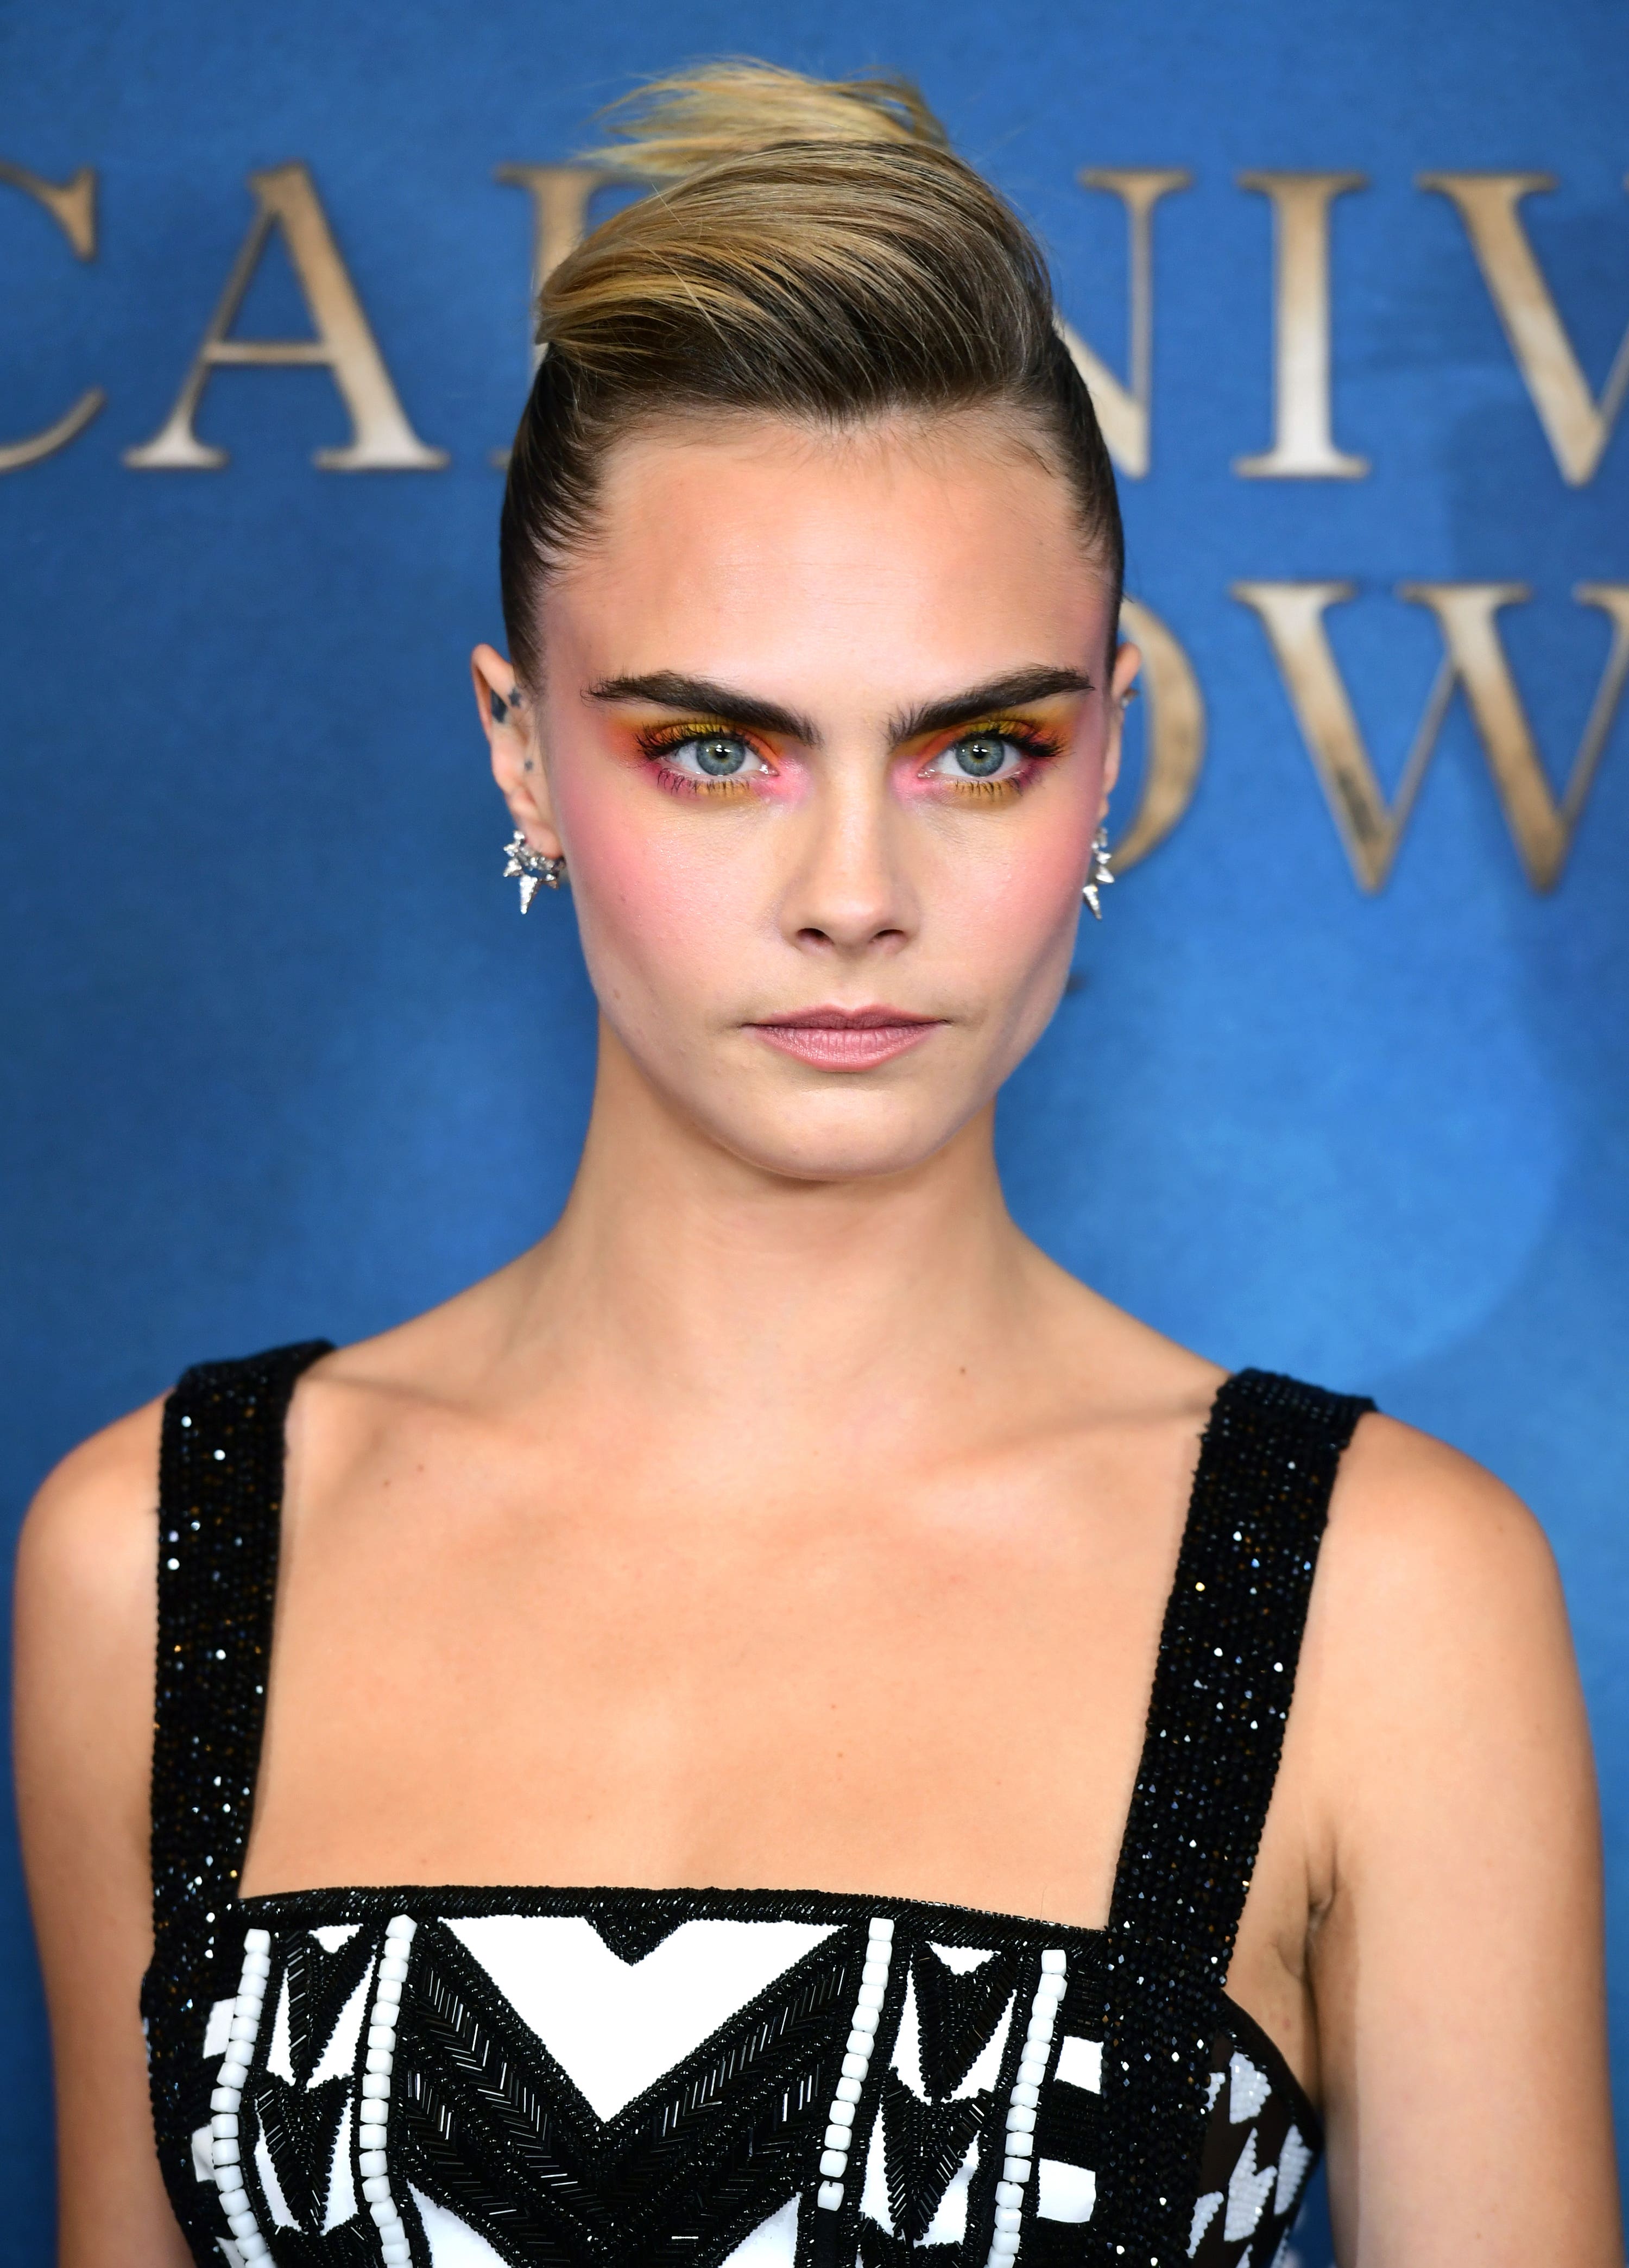 Cara Delevingne said her ‘heart is broken’ following the fire.